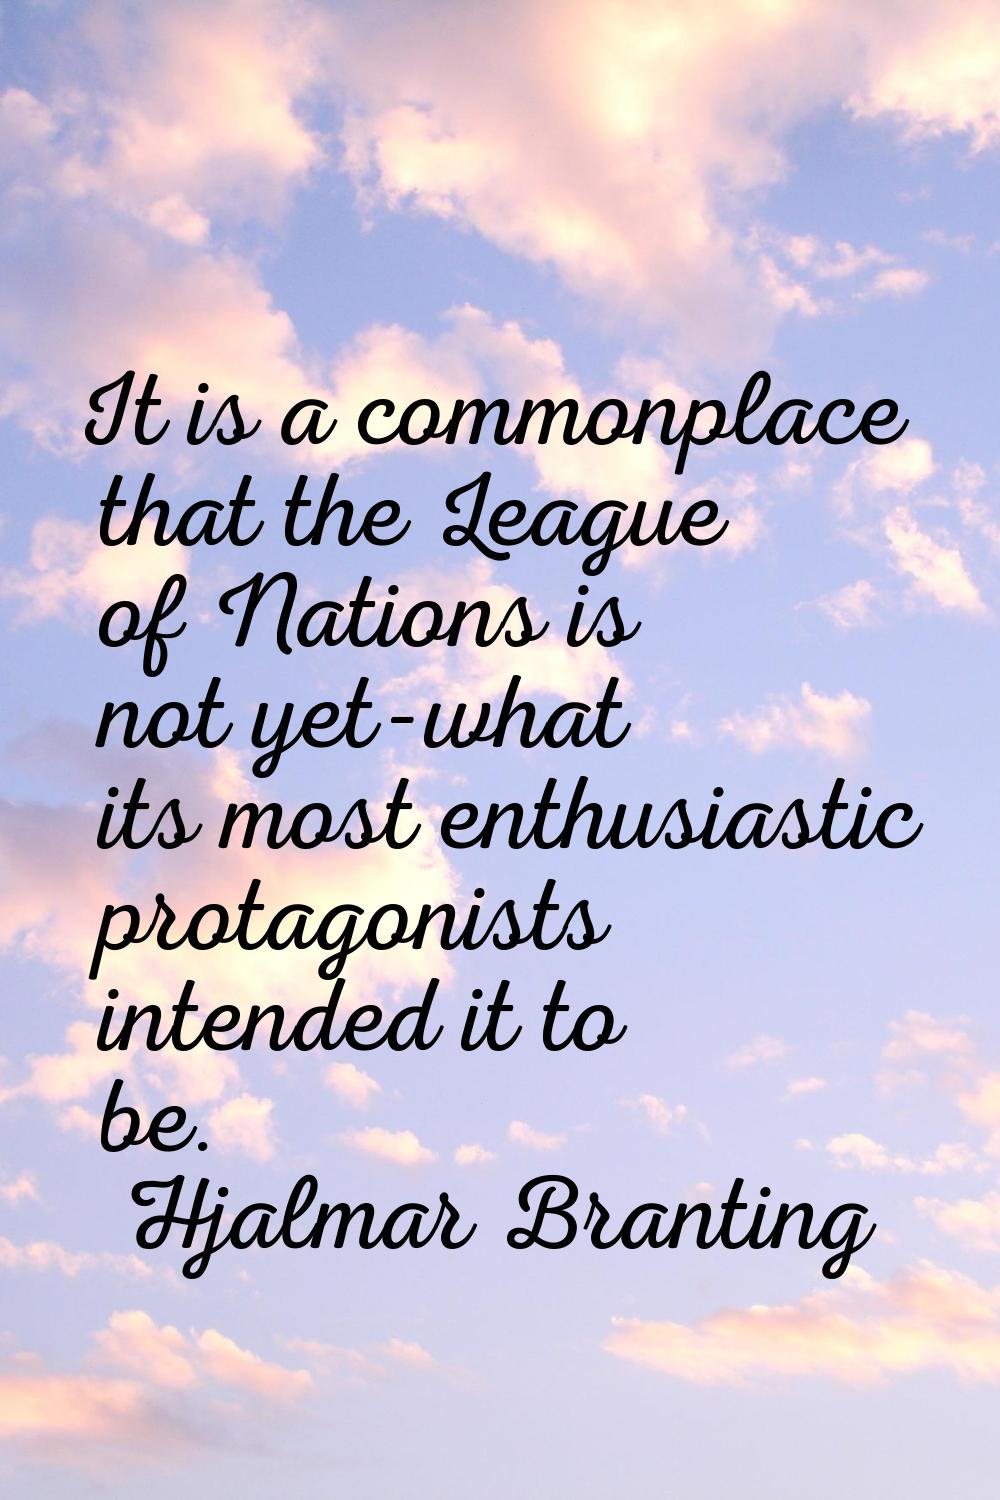 It is a commonplace that the League of Nations is not yet-what its most enthusiastic protagonists i